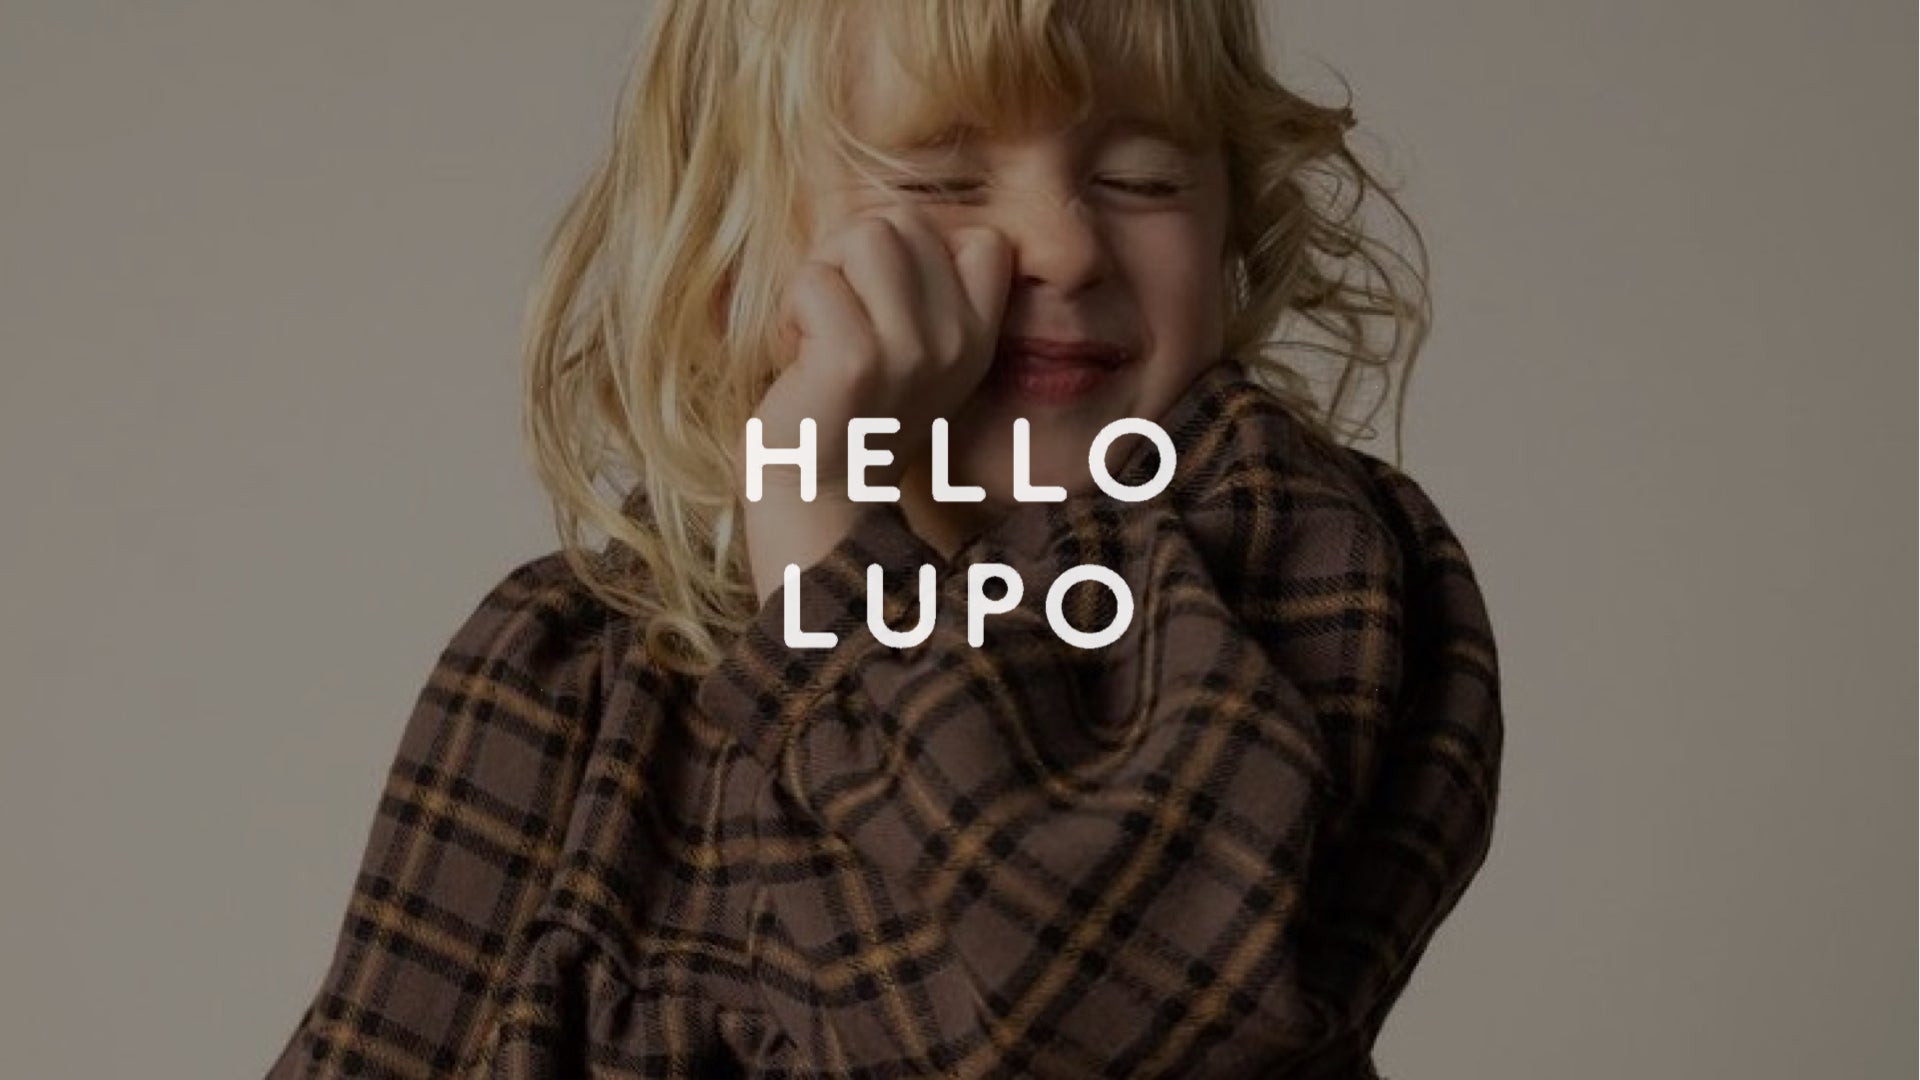 2023aw HELLO LUPO Dalston Blommers-